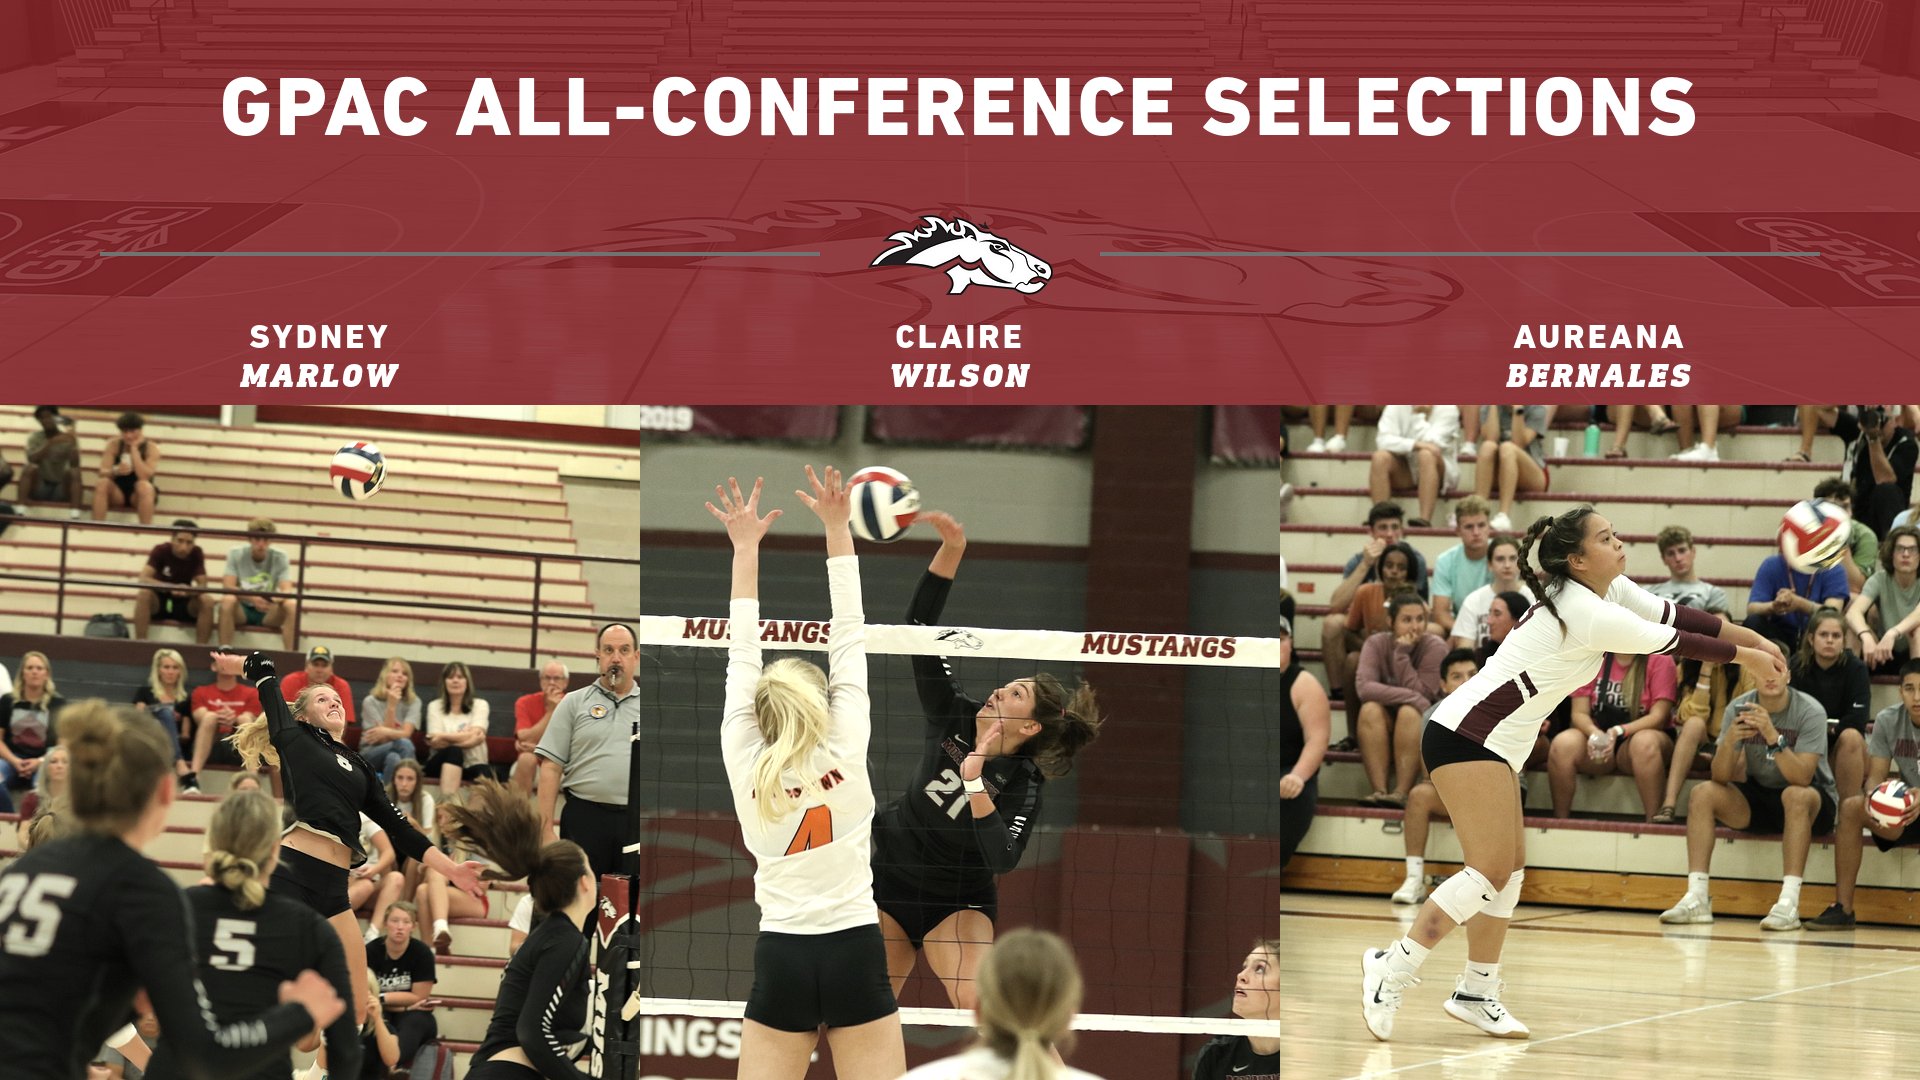 Women's volleyball GPAC All-Conference Selections - Sydney Marlow, Claire Wilson, Aureana Bernales